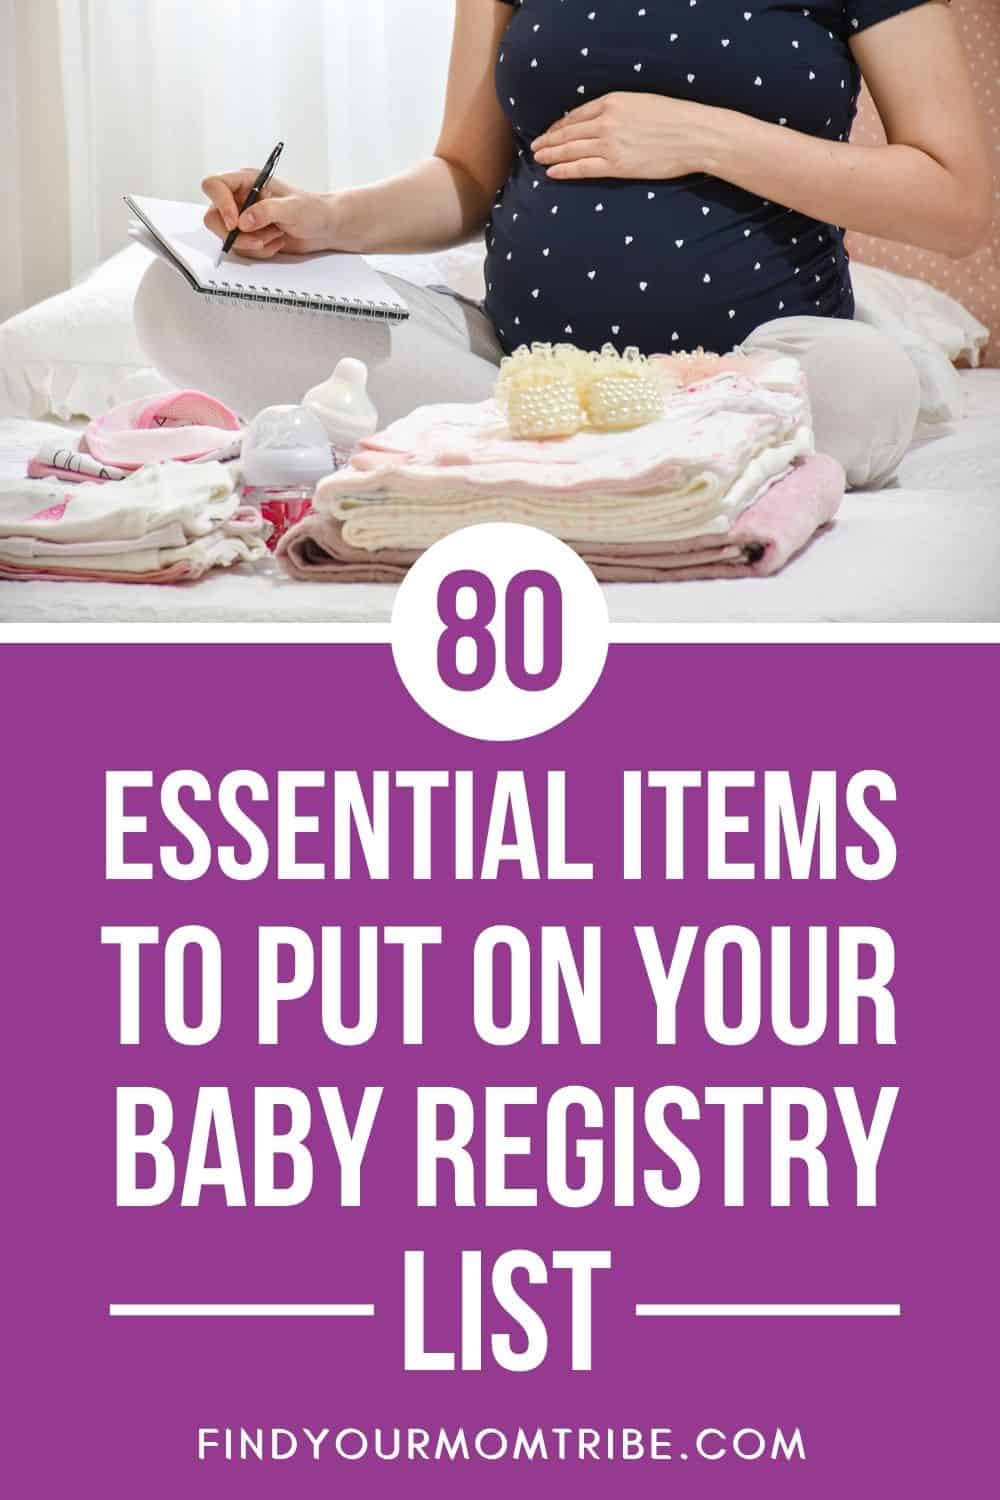 80 Essential Items To Put On Your Baby Registry List Pinterest